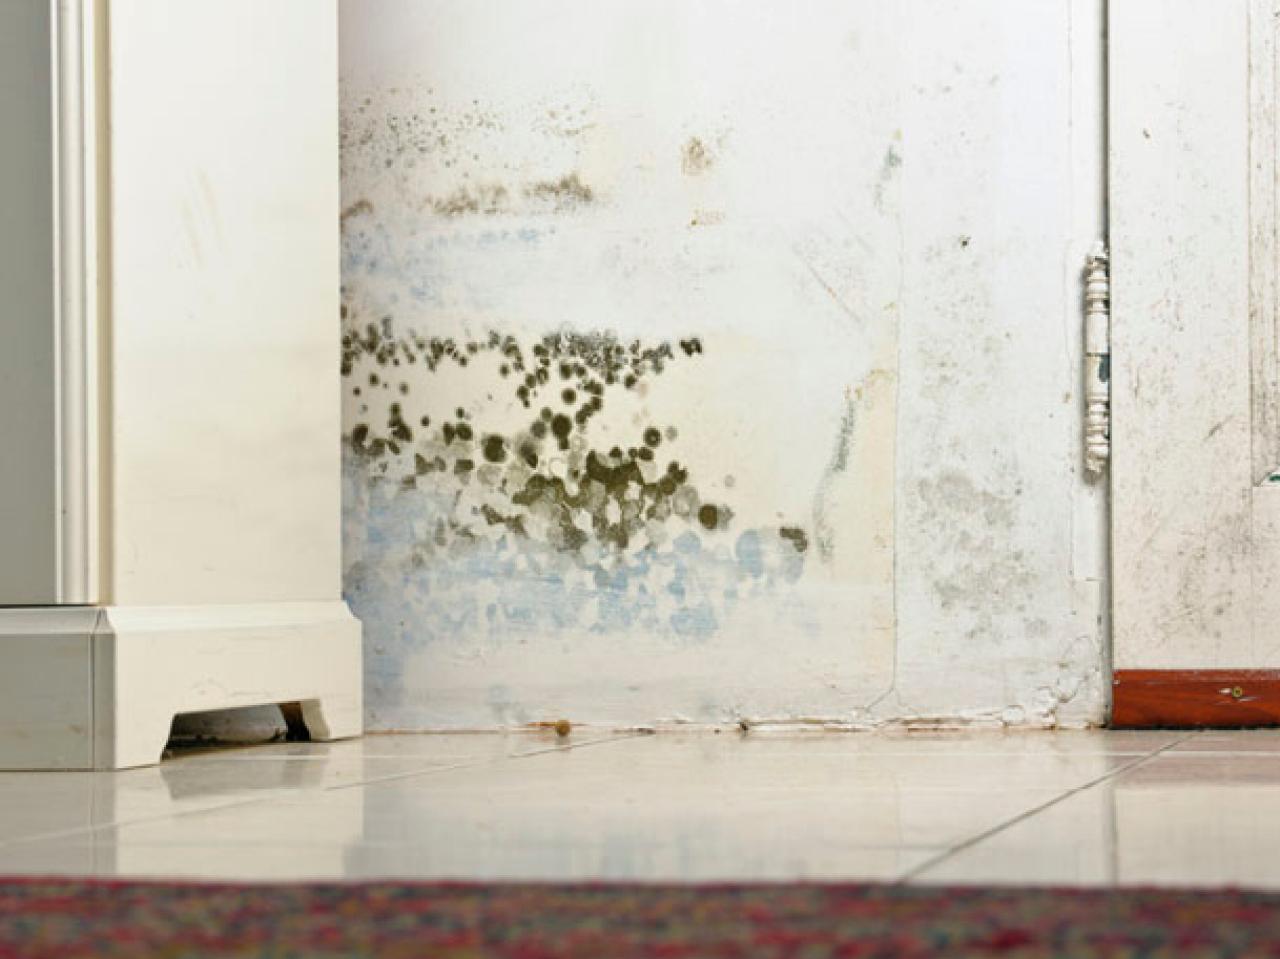 Black Mold: What You Should Know | HGTV